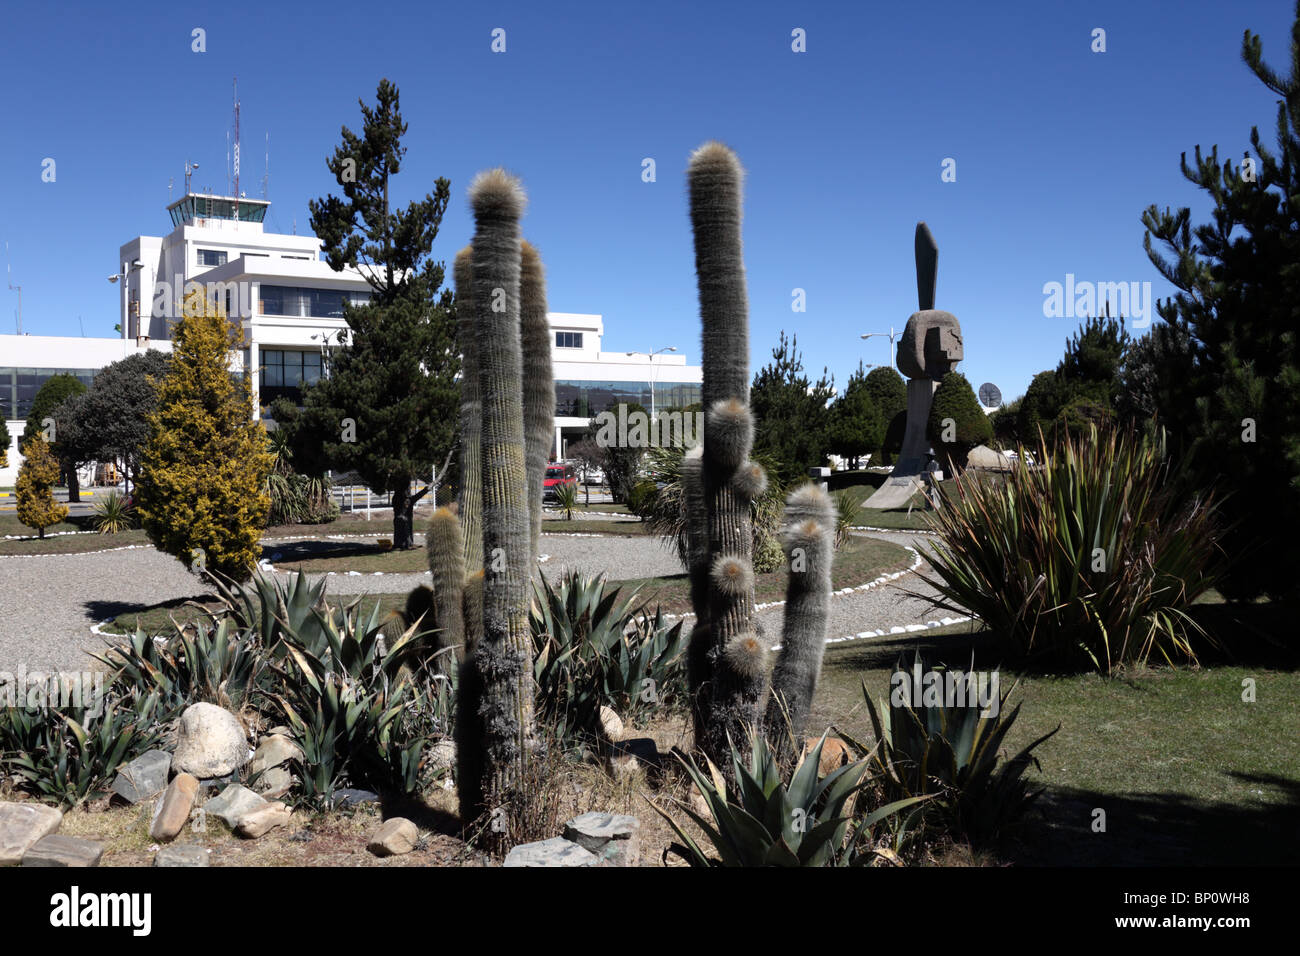 La Paz / El Alto airport (LPB, the highest international airport in the world at 4050m ) and Echinopsis cacti, El Alto , Bolivia Stock Photo